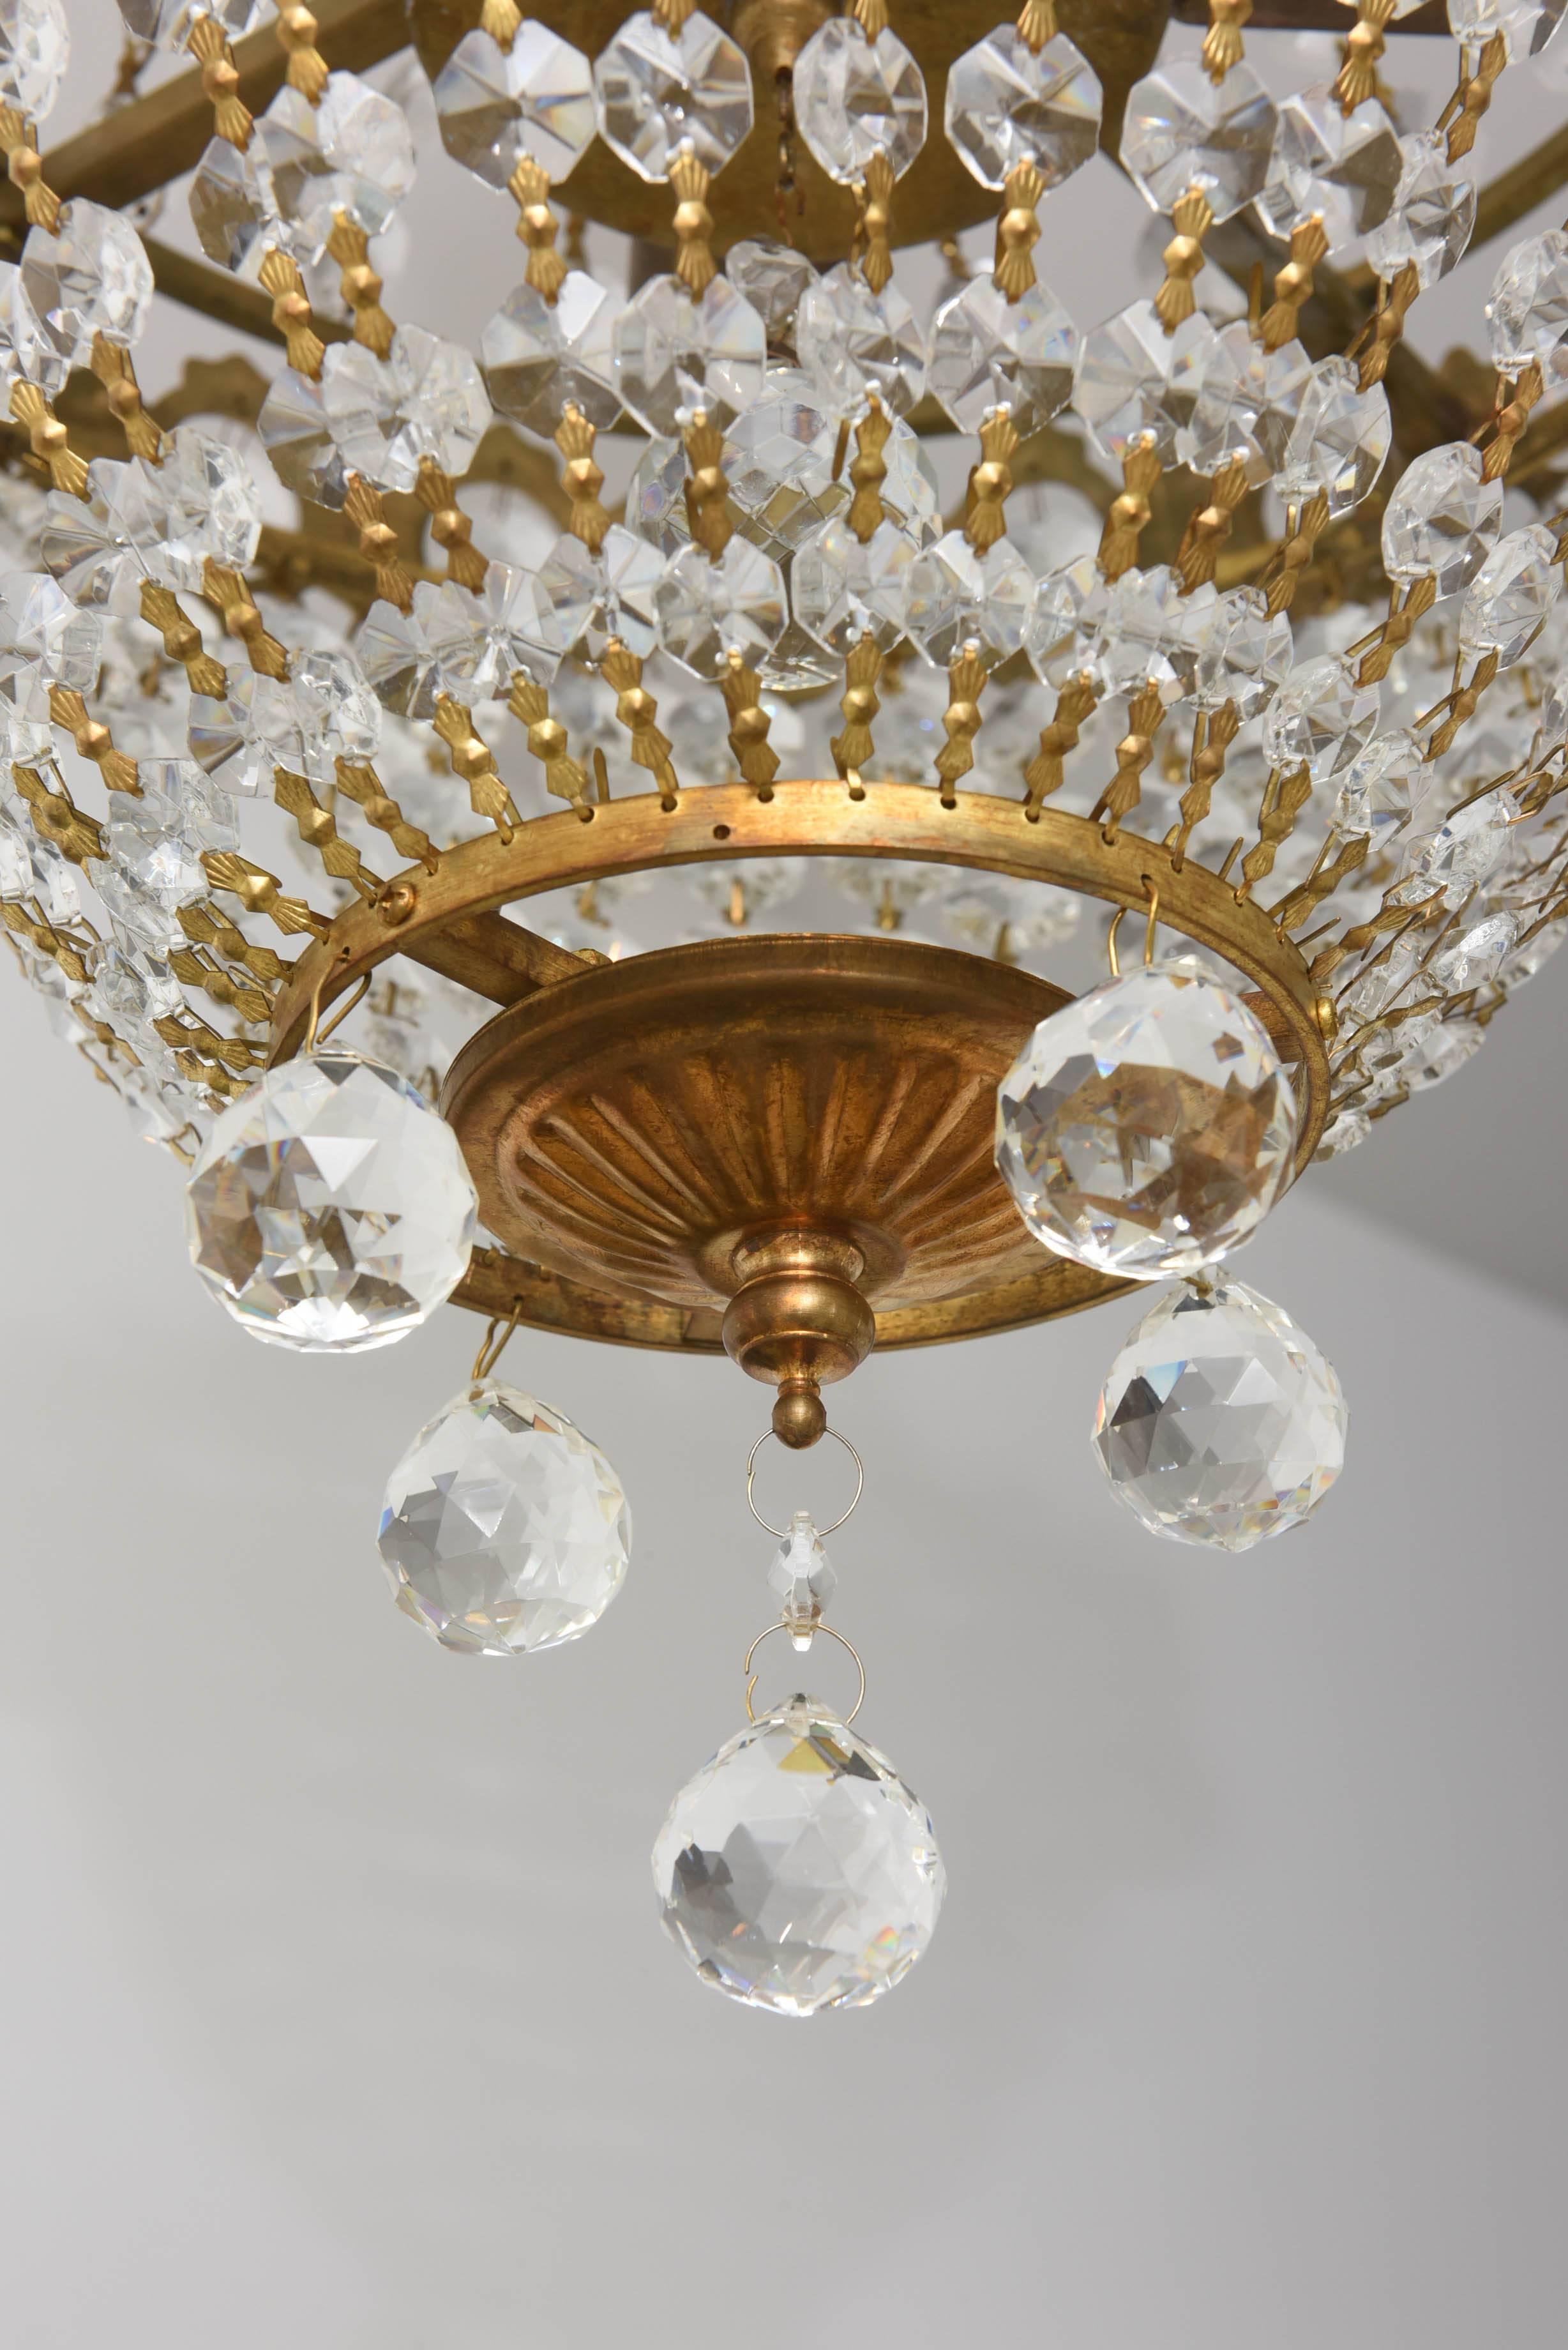 20th Century Hollywood Regency, Louis XVI Style Chandelier in Antique Brass and Crystals